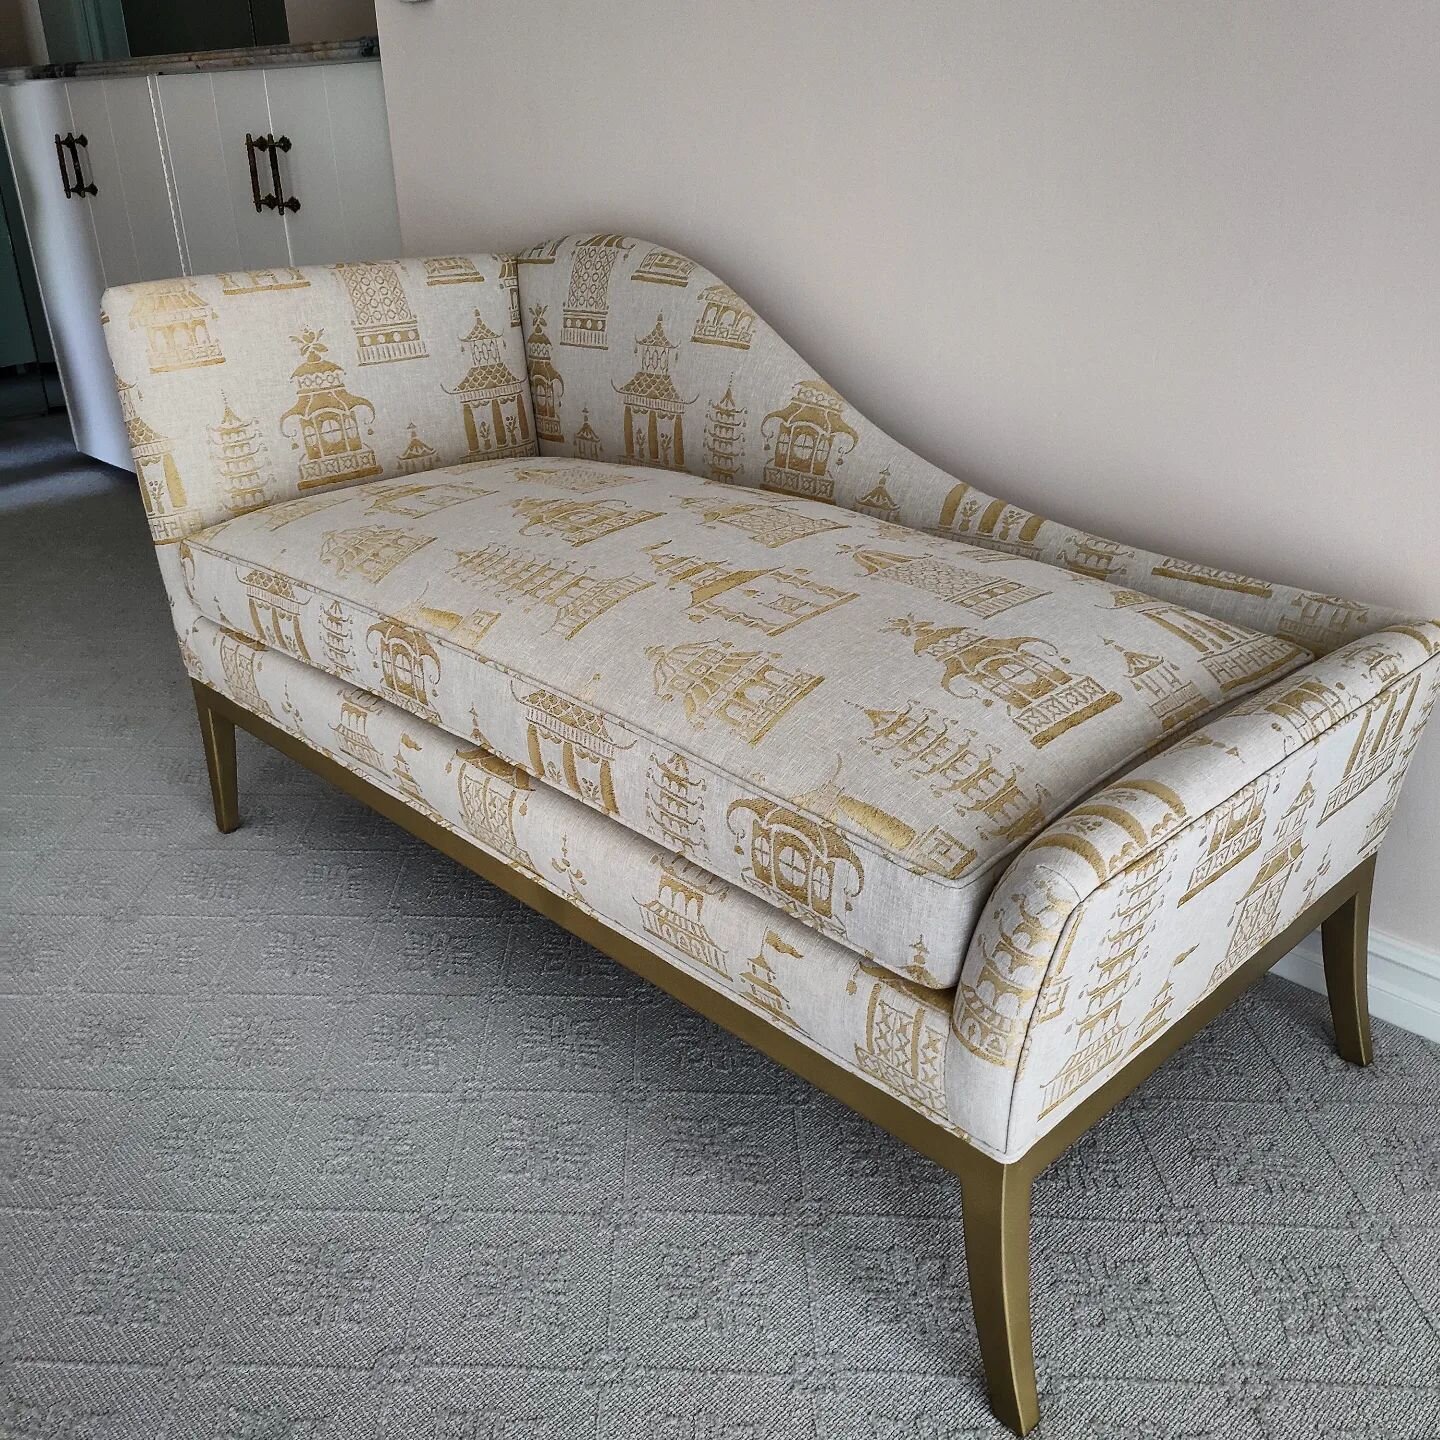 Custom made feather cushion chaise lounge

#upholstery #familybusiness #furnitureupholstery #sandiego #elcajon #smallbusiness #chaiselounge